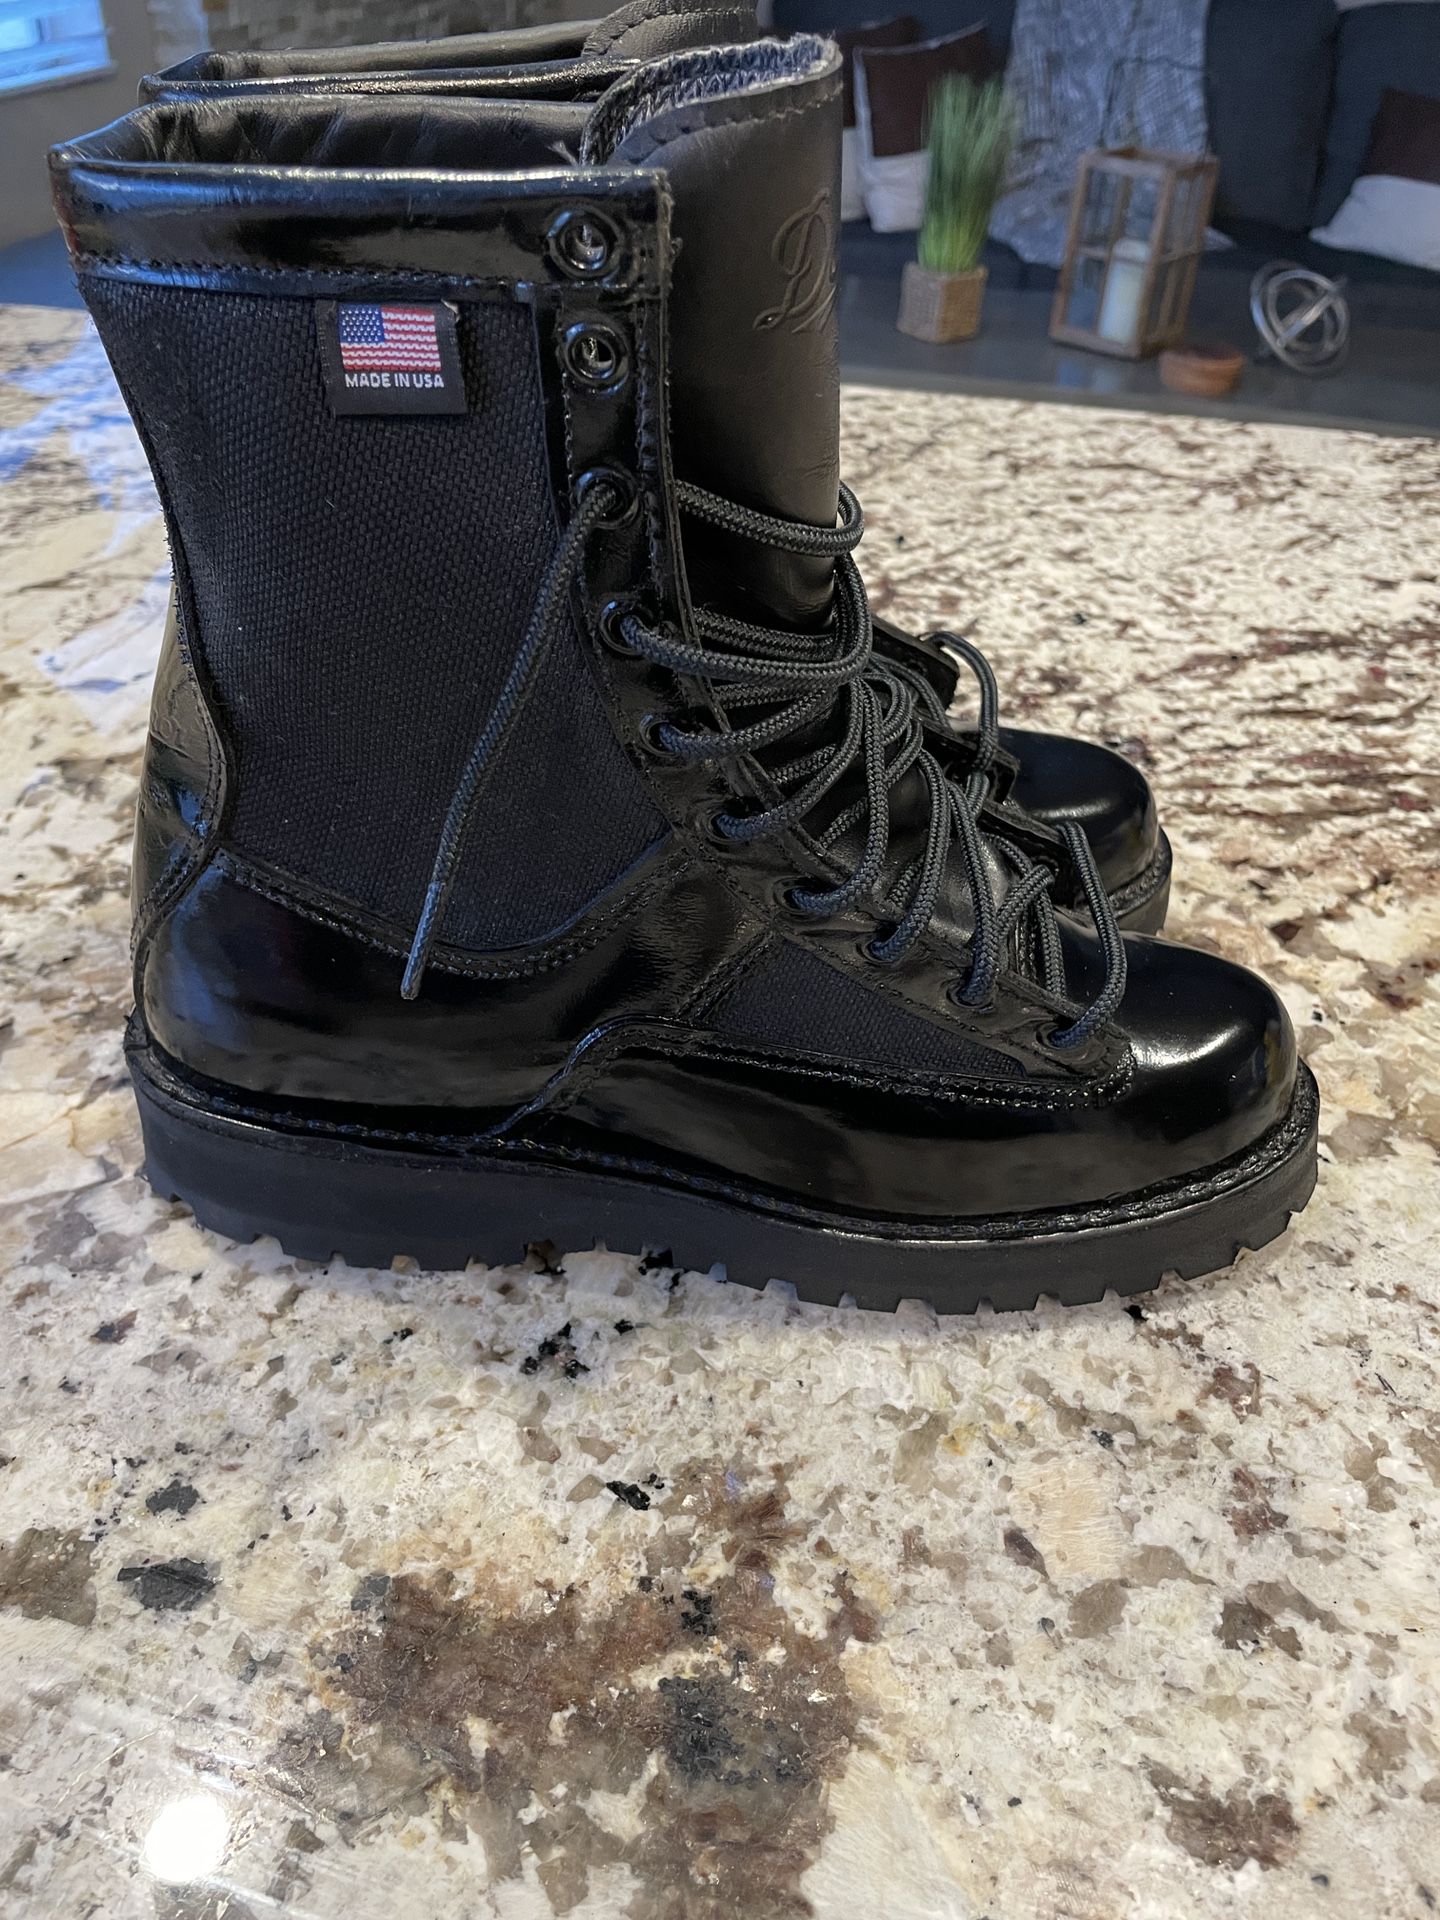 Danner Acadia 8” womens Tactical Duty boots - Brand New